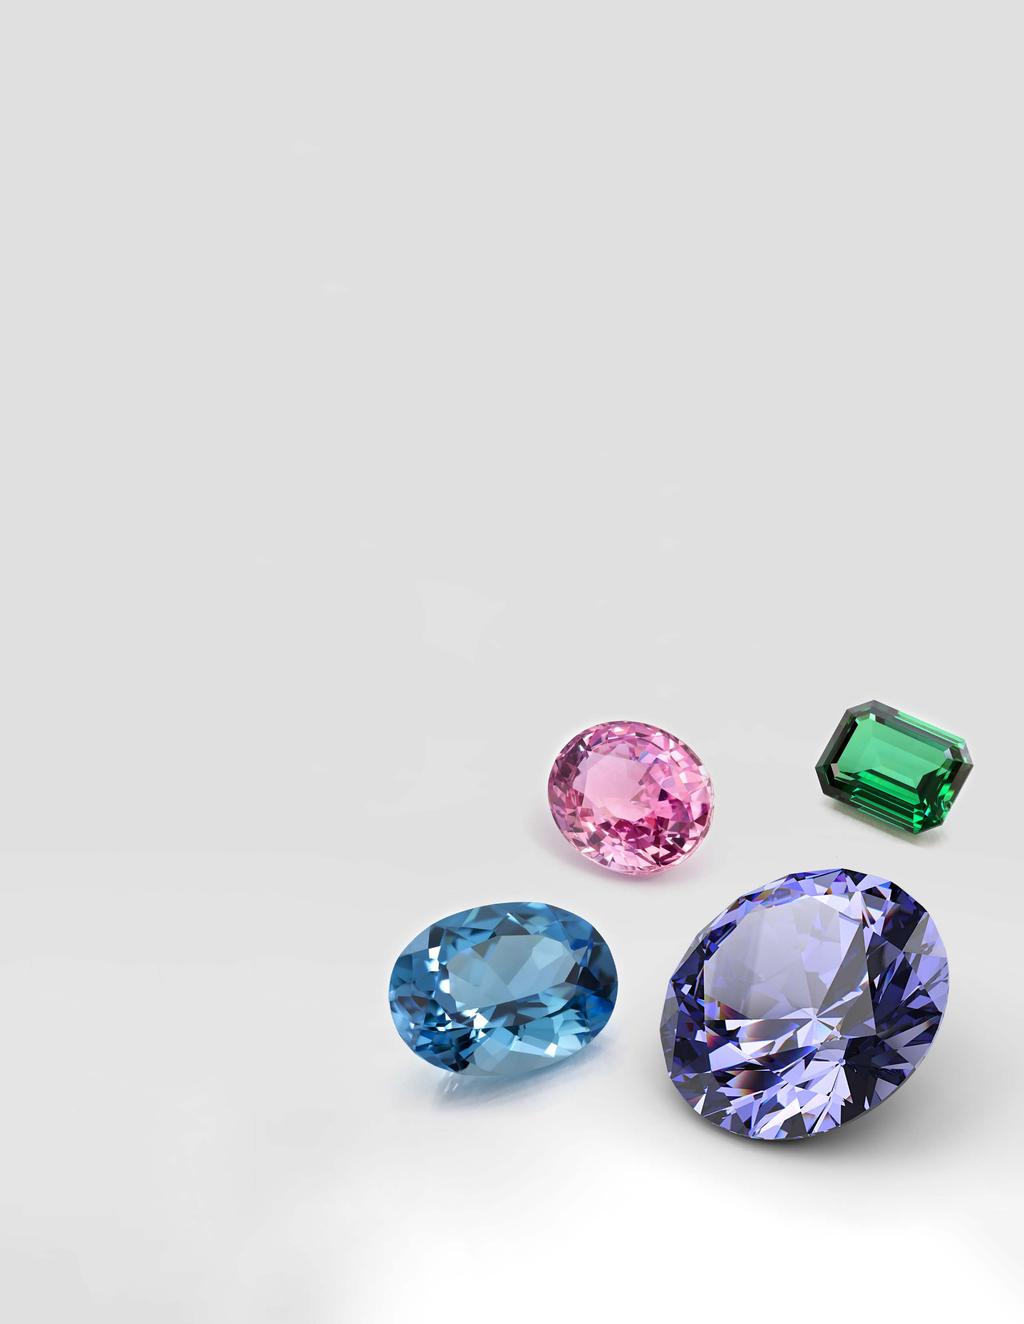 DISCOVER SOME OF THE MOST BREATHTAKING NATURAL FANCY COLORED DIAMONDS As well as Rubies, Emeralds, and Sapphires, available at Rare Diamond Investor PRIVATE, PORTABLE, SAFE, AND SECURE.